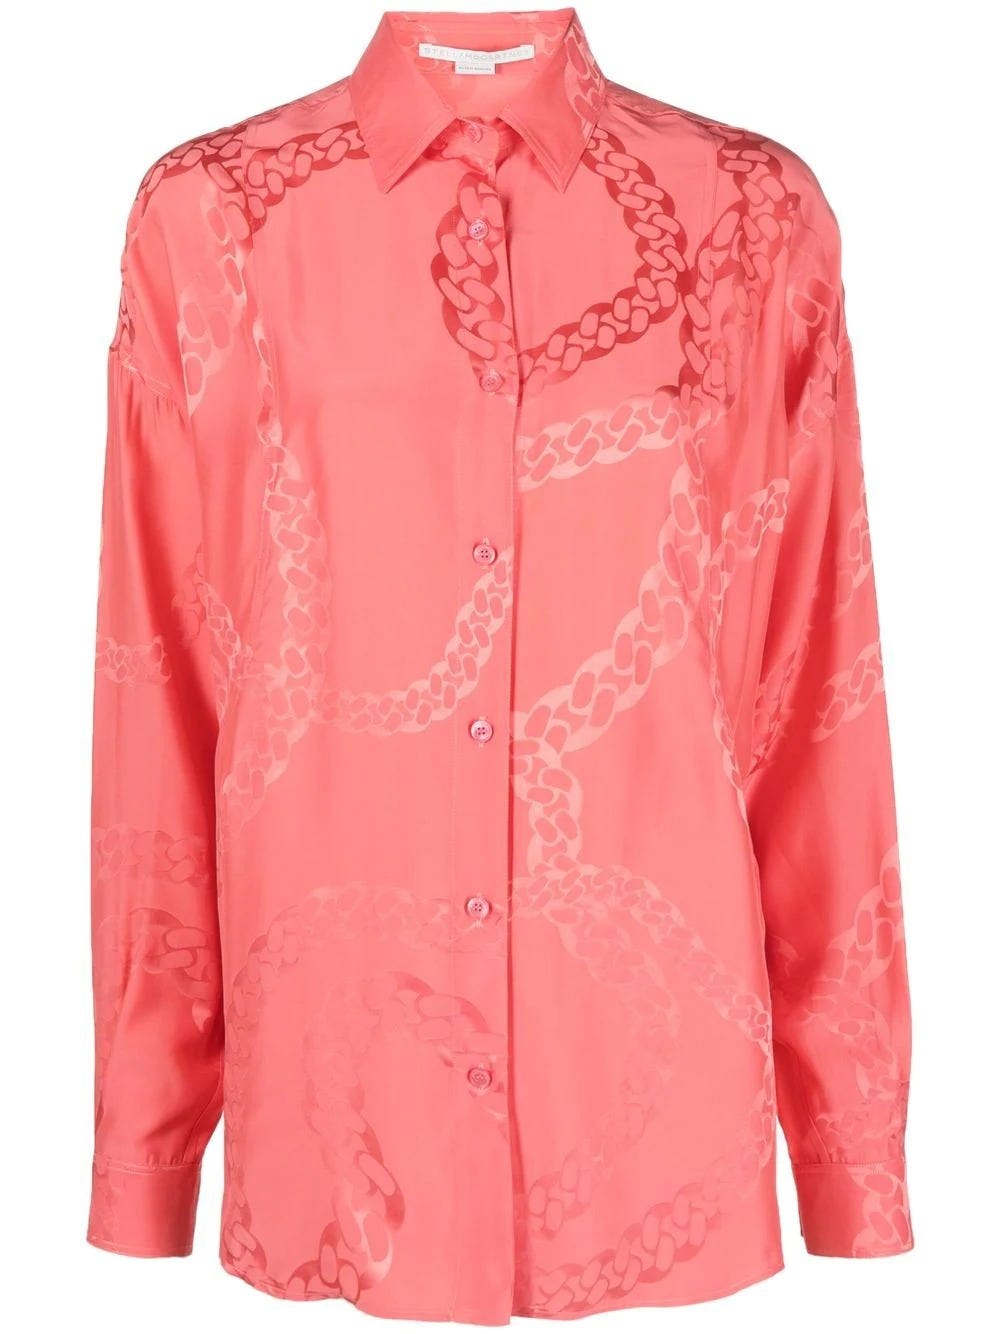 STELLA MCCARTNEY PINK LONG-SLEEVED SHIRT WITH CHAIN PRINT